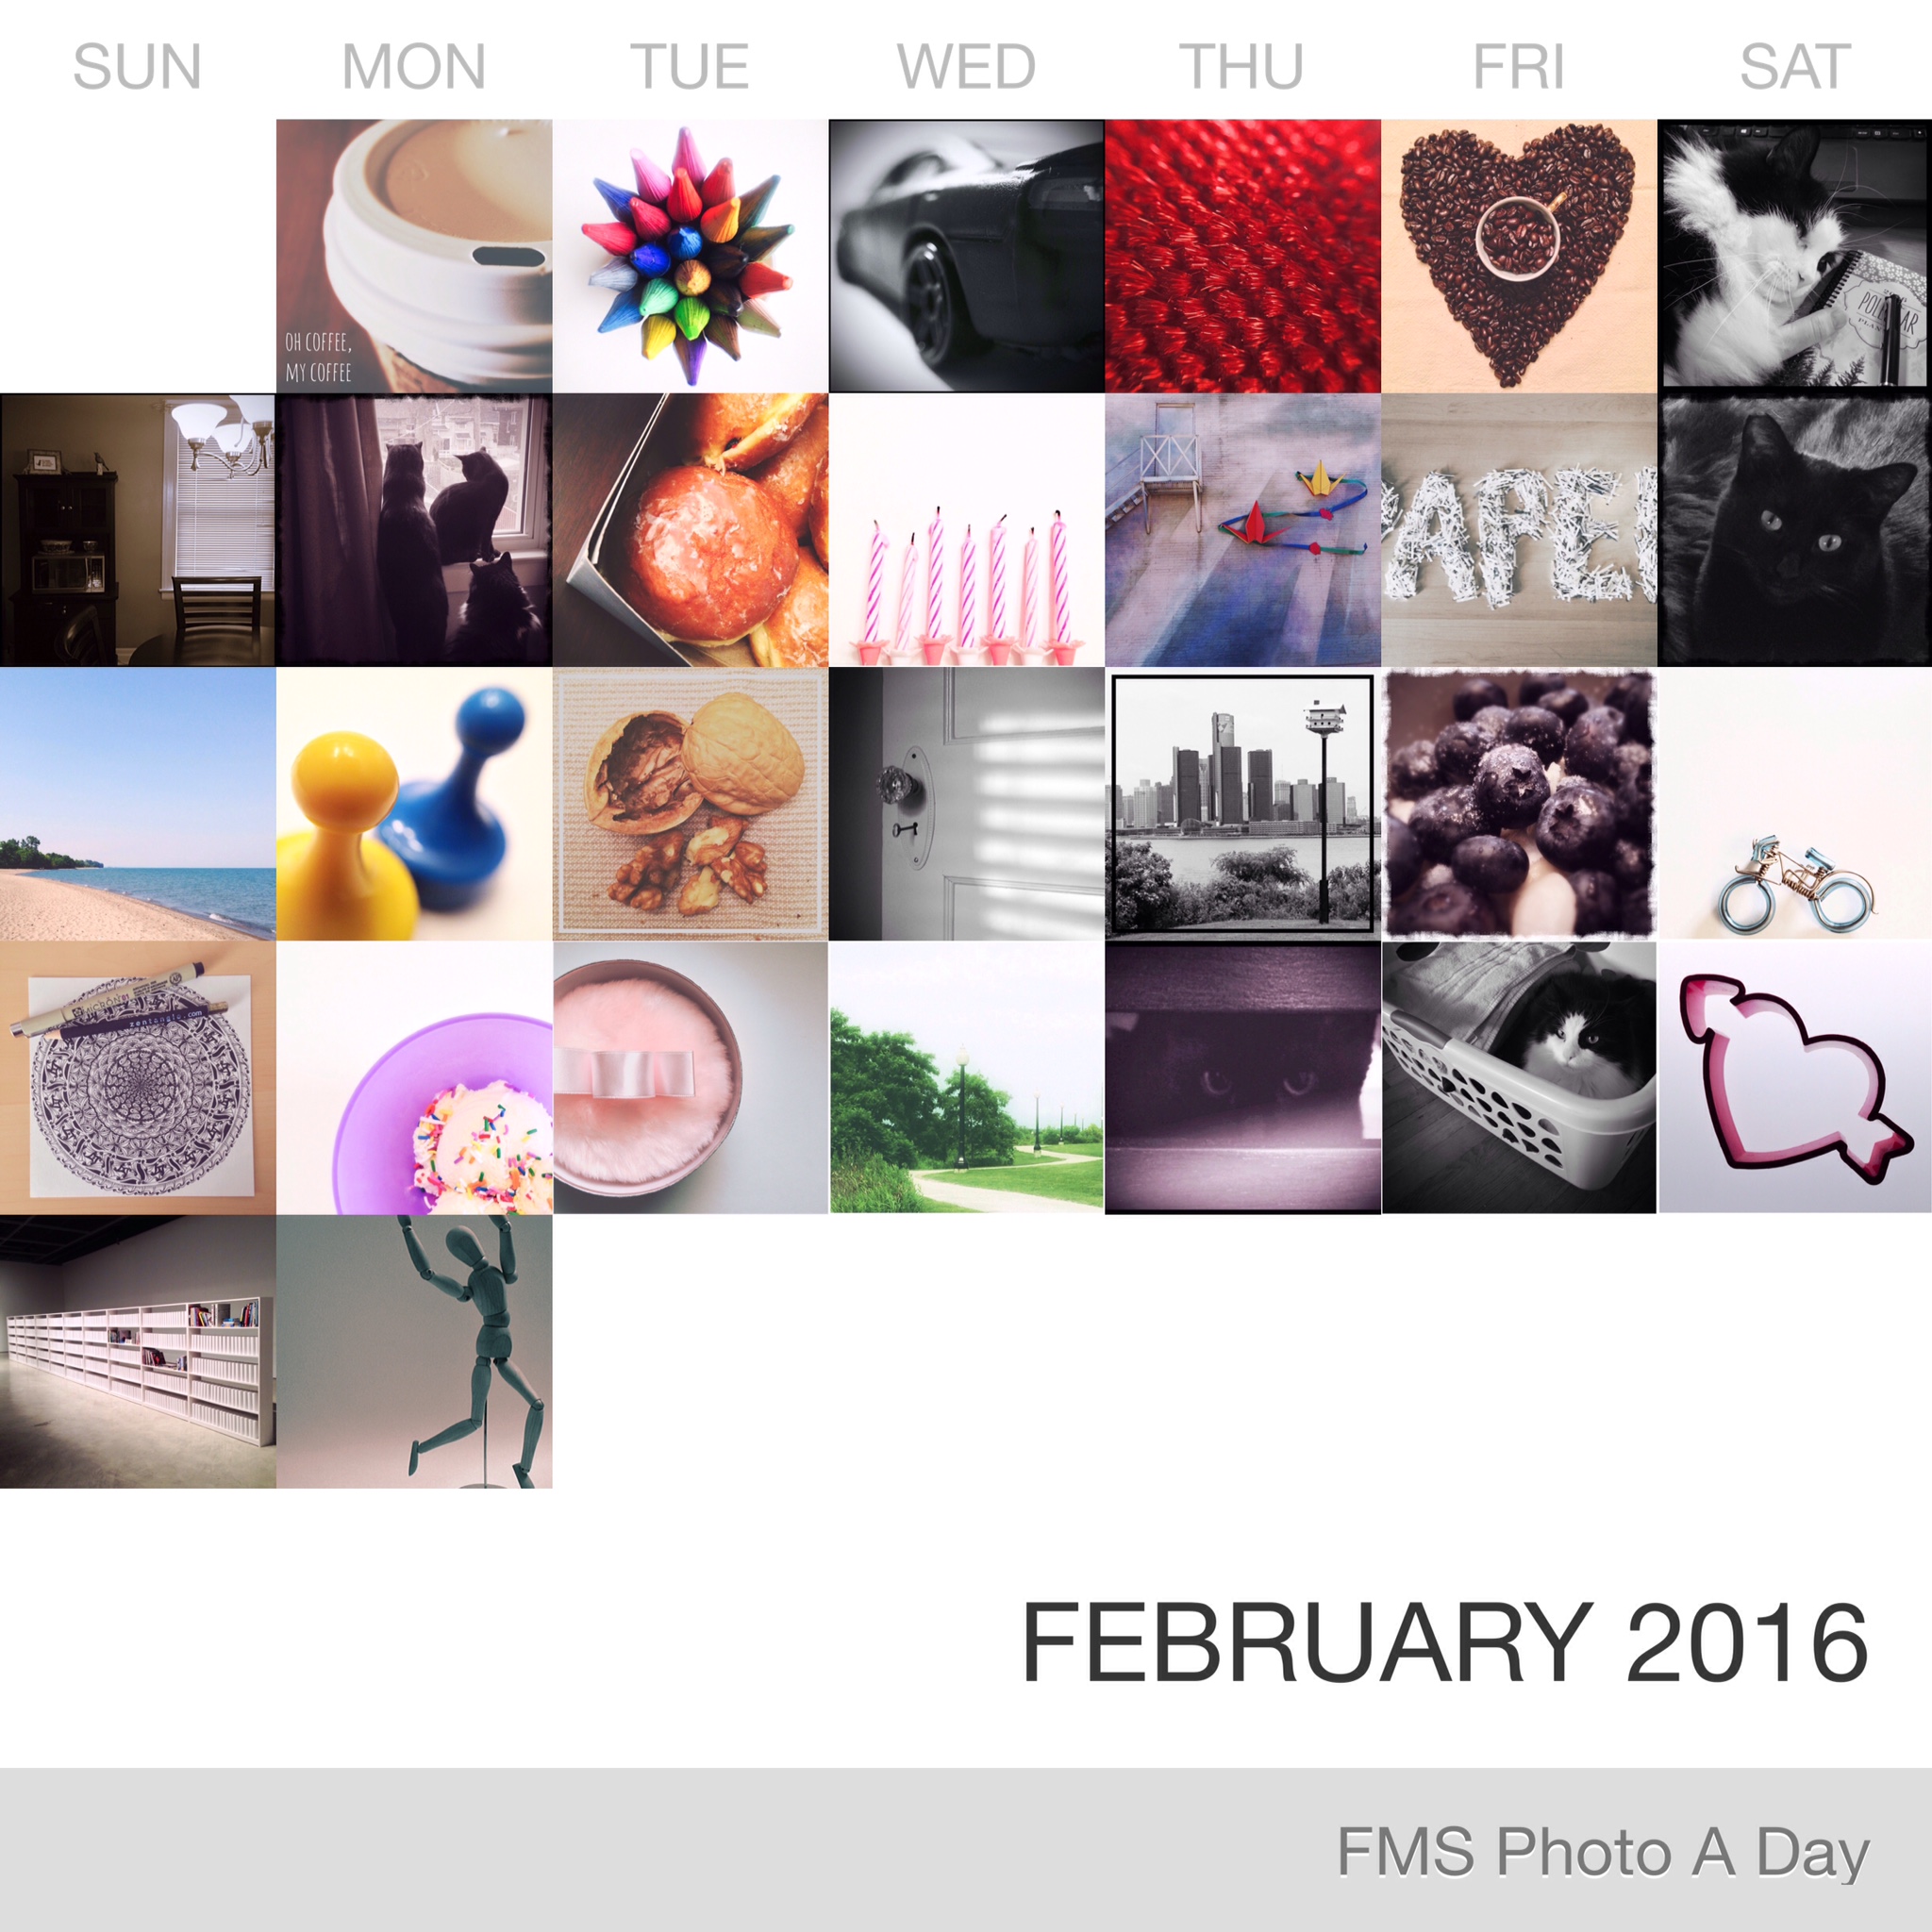 FMS Photo A Day February 2016